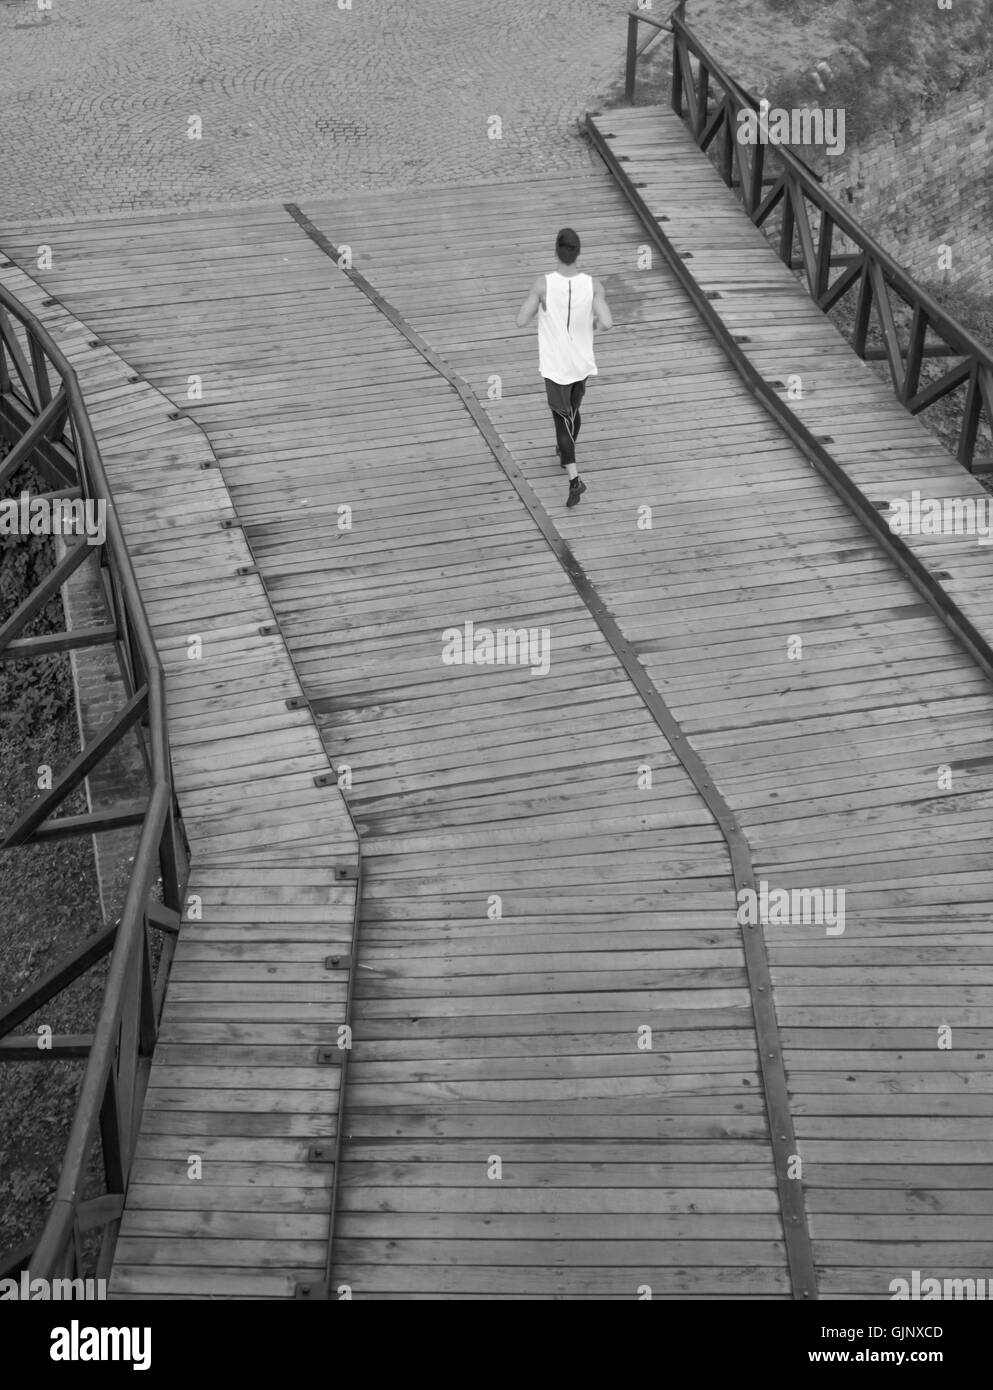 black and white one man run jogging elevated view rear back Stock Photo